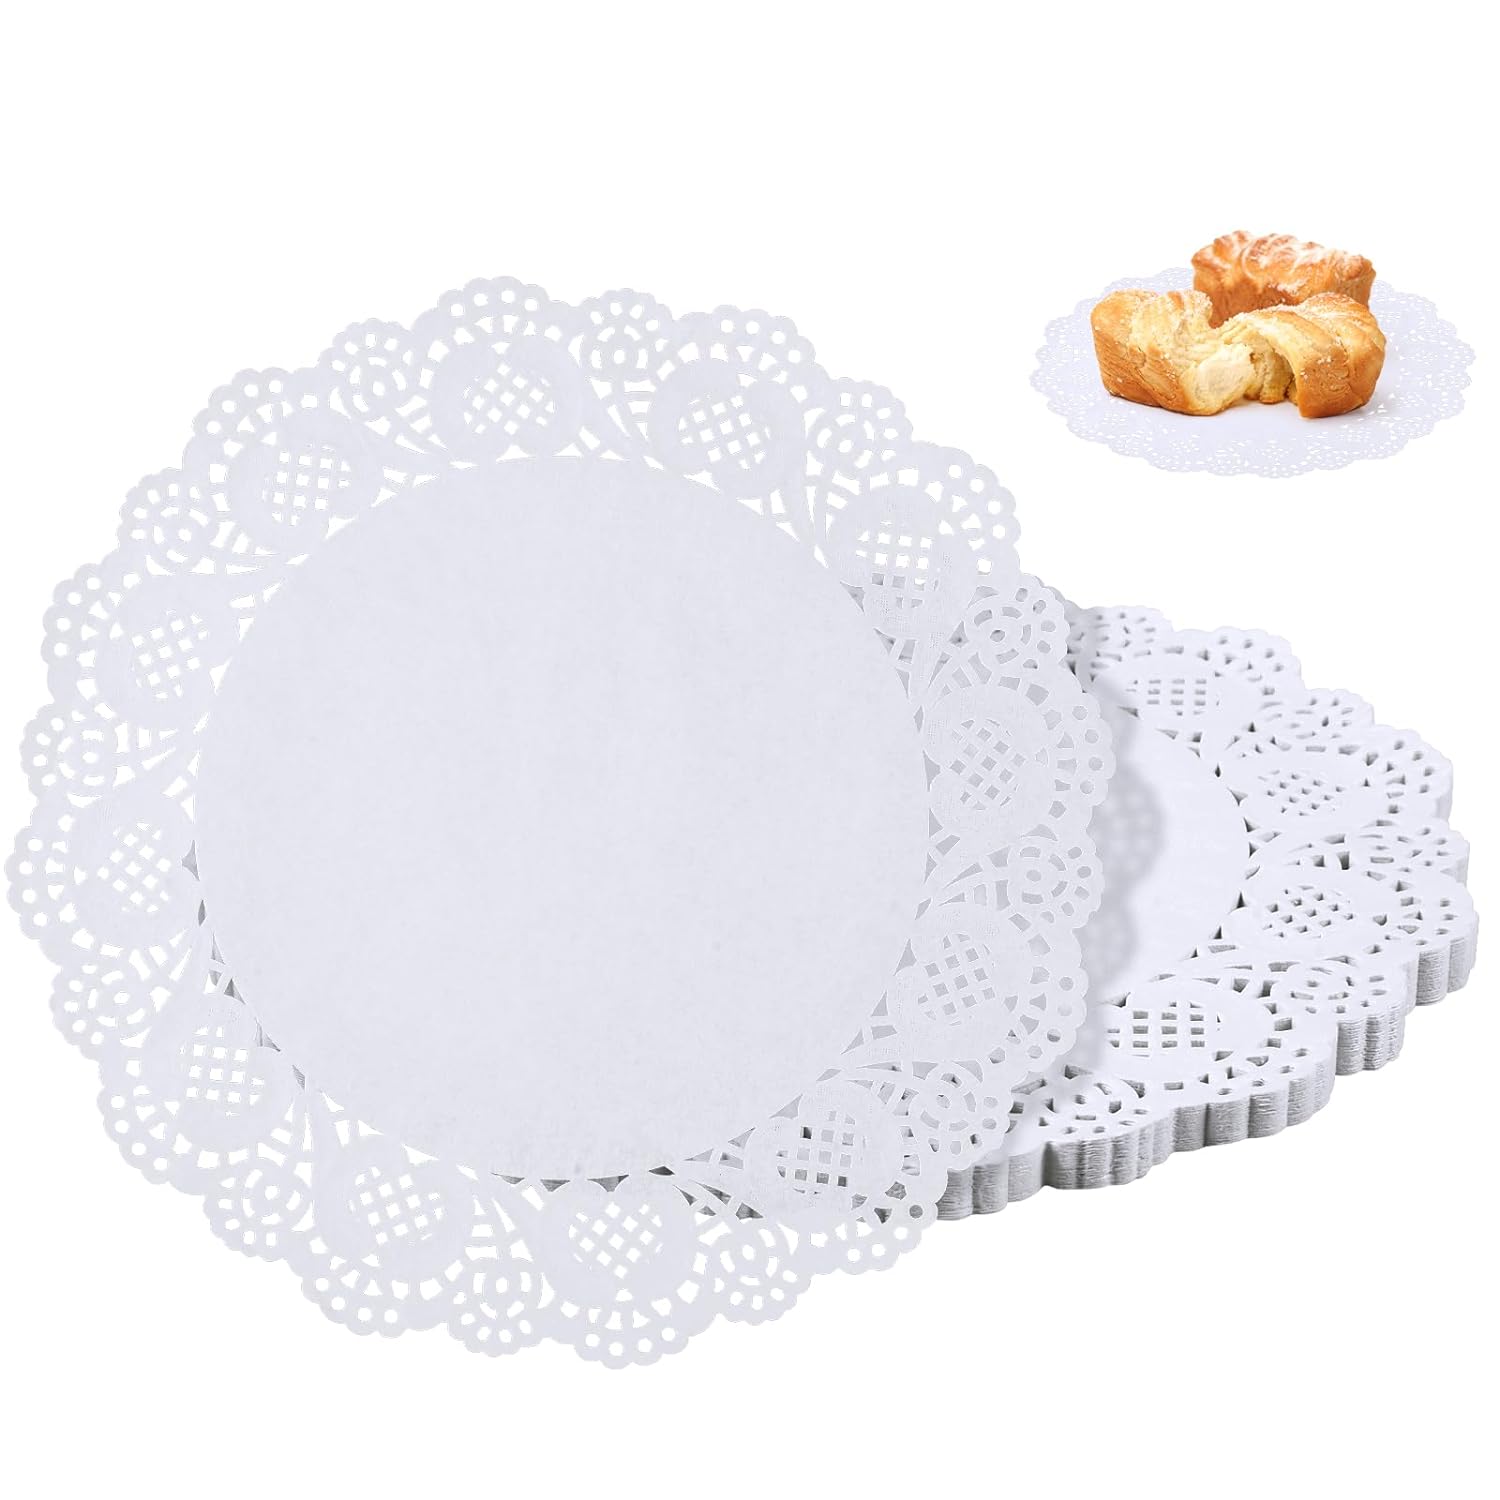 150 Pieces Paper Doilies, 12 Inch Doilies for Food, Disposable Lace Paper  Doilies for Tables, Round Paper Placemats Bulk for Cakes Desserts